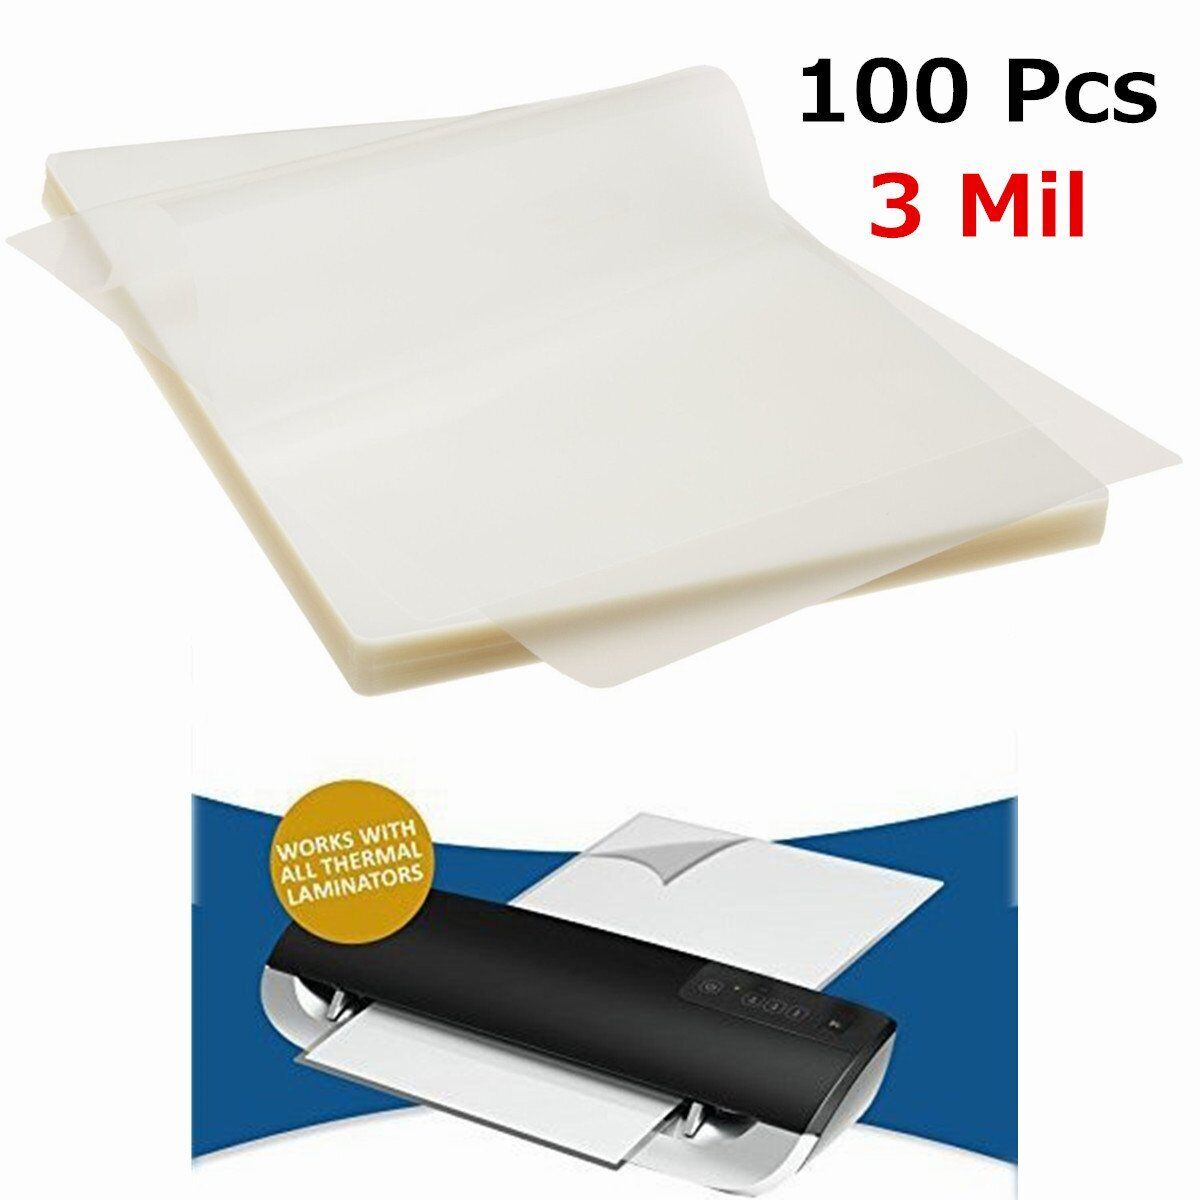 100 Pack 3 Mil Clear Letter Size Thermal Laminating Pouches for 9" X 11.5" Sheet MFLABEL Does Not Apply